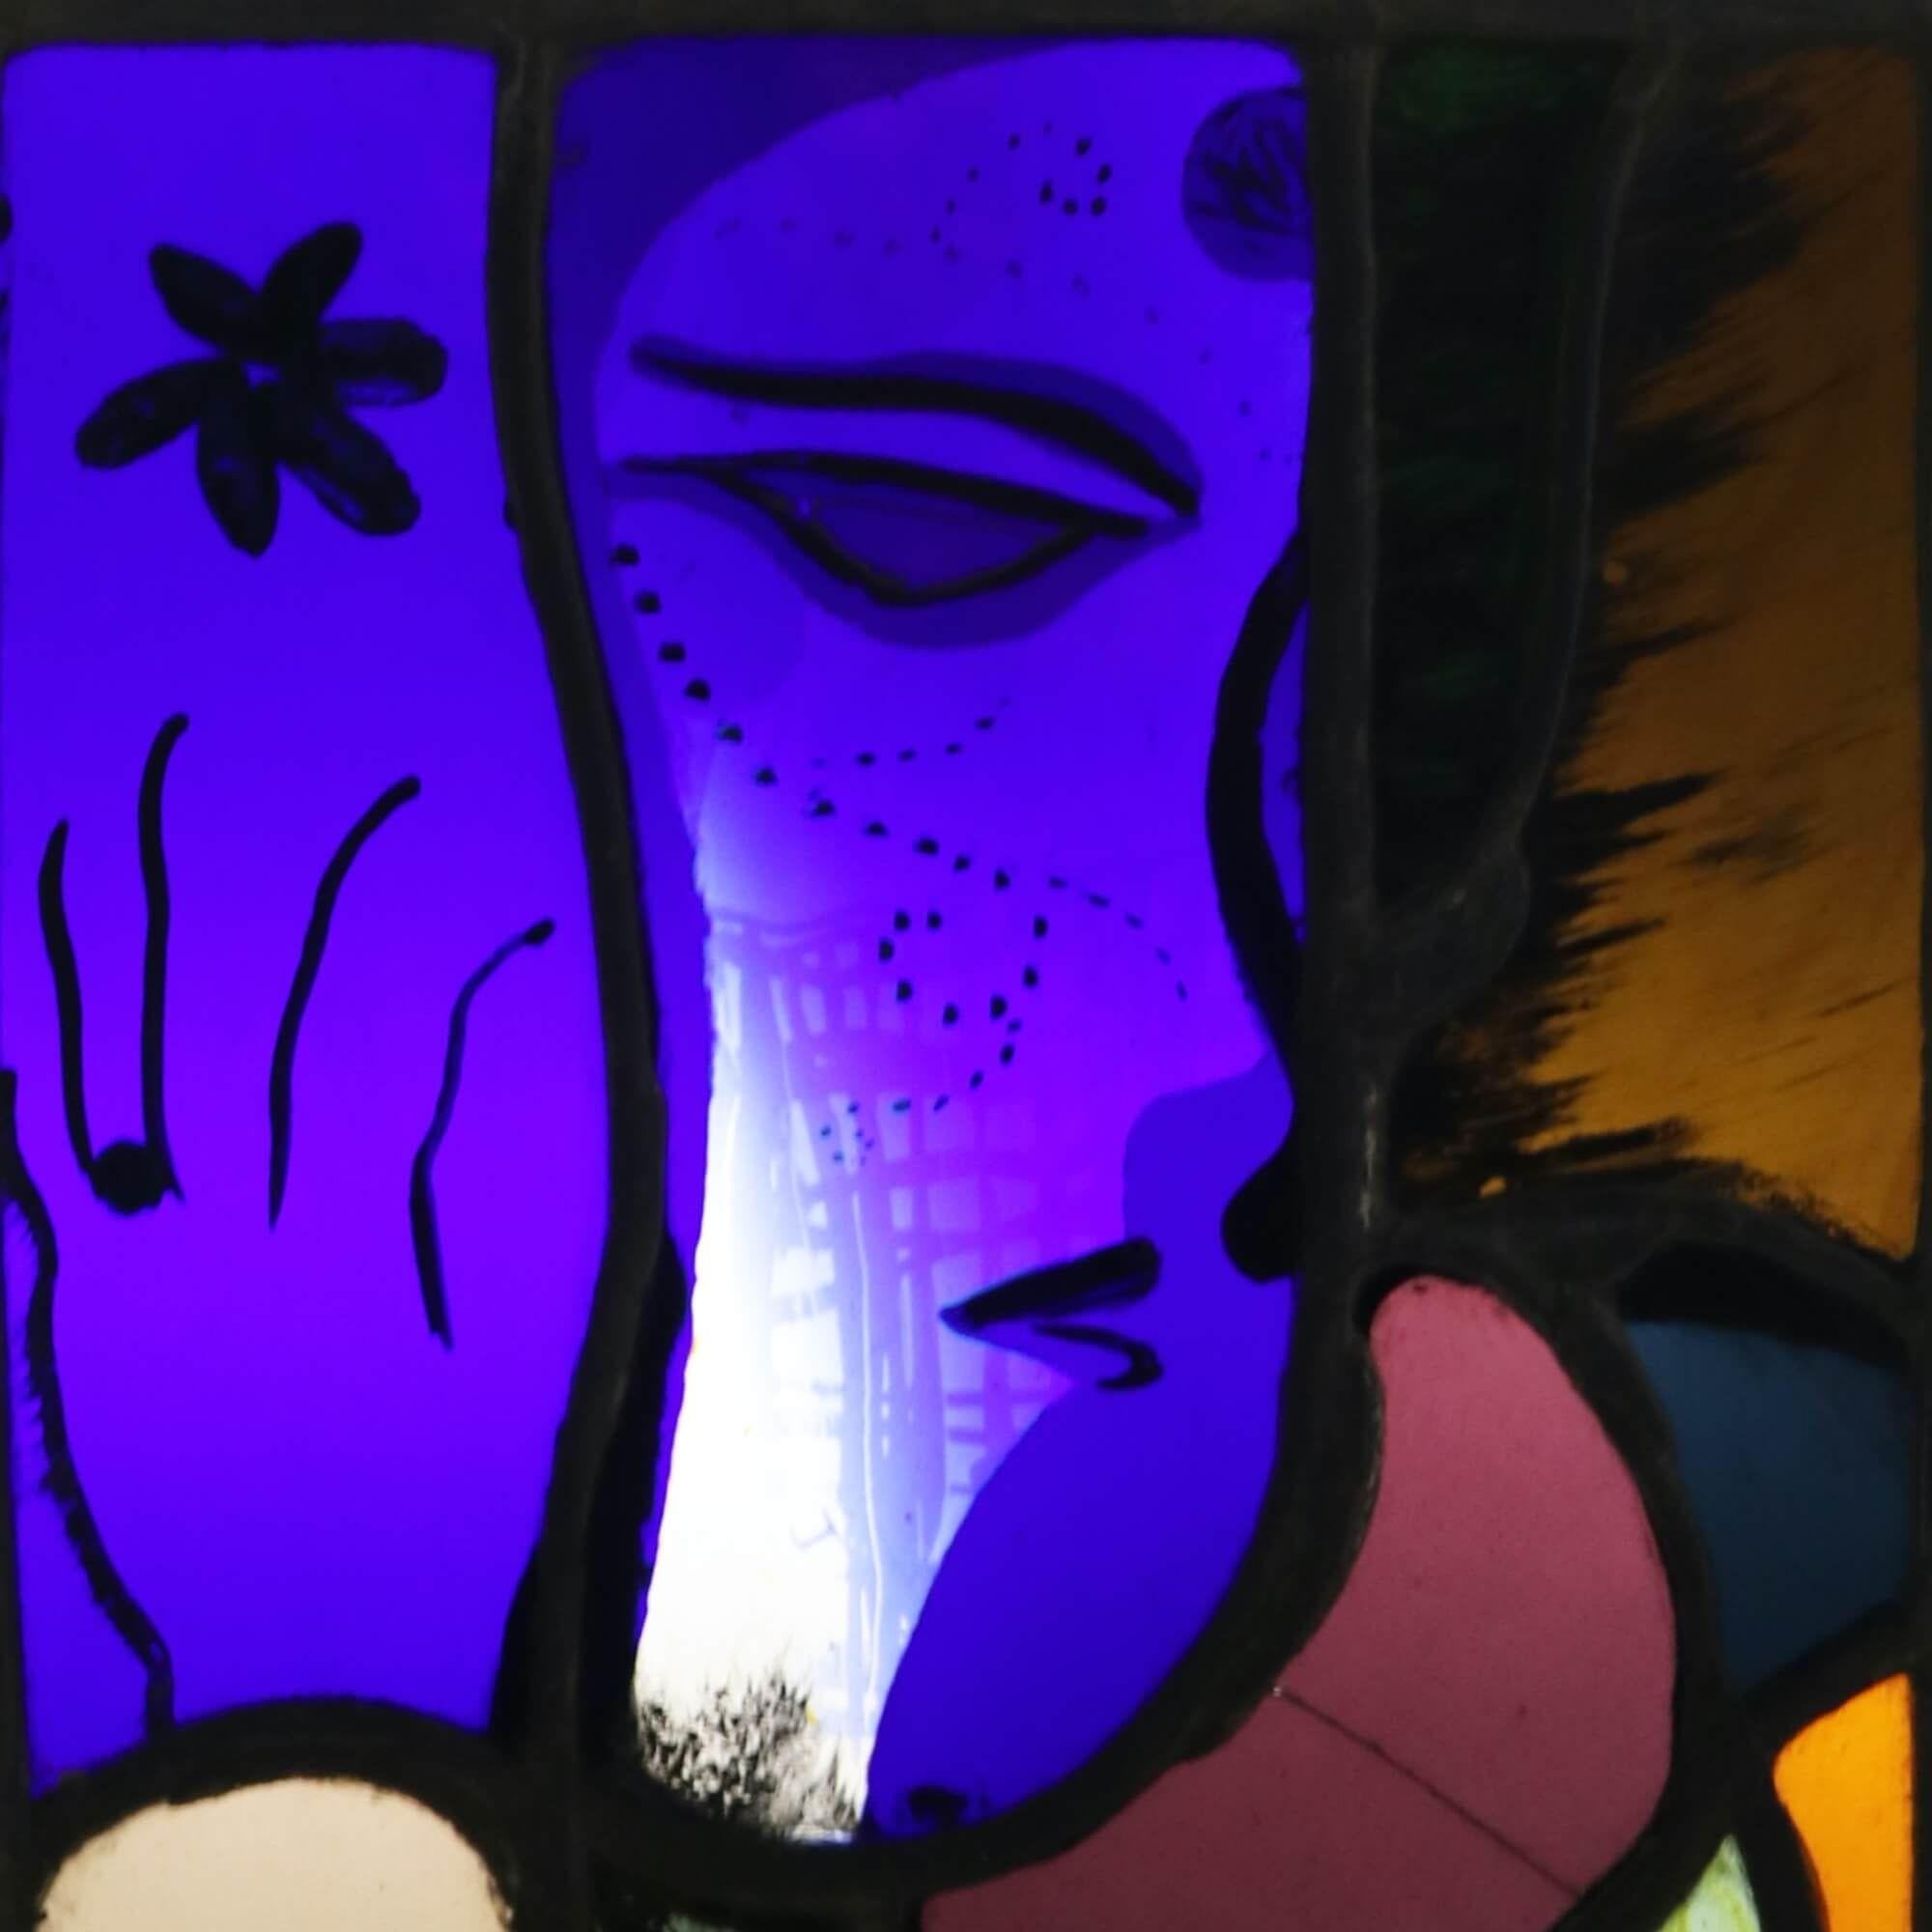 A small modern stained glass panel from the studio of Patrick Reyntiens (1925-2021). Attributed to the artist, this stained glass window depicts a figurative design with abstract hand painted details and vibrant colours. It is one of various stained